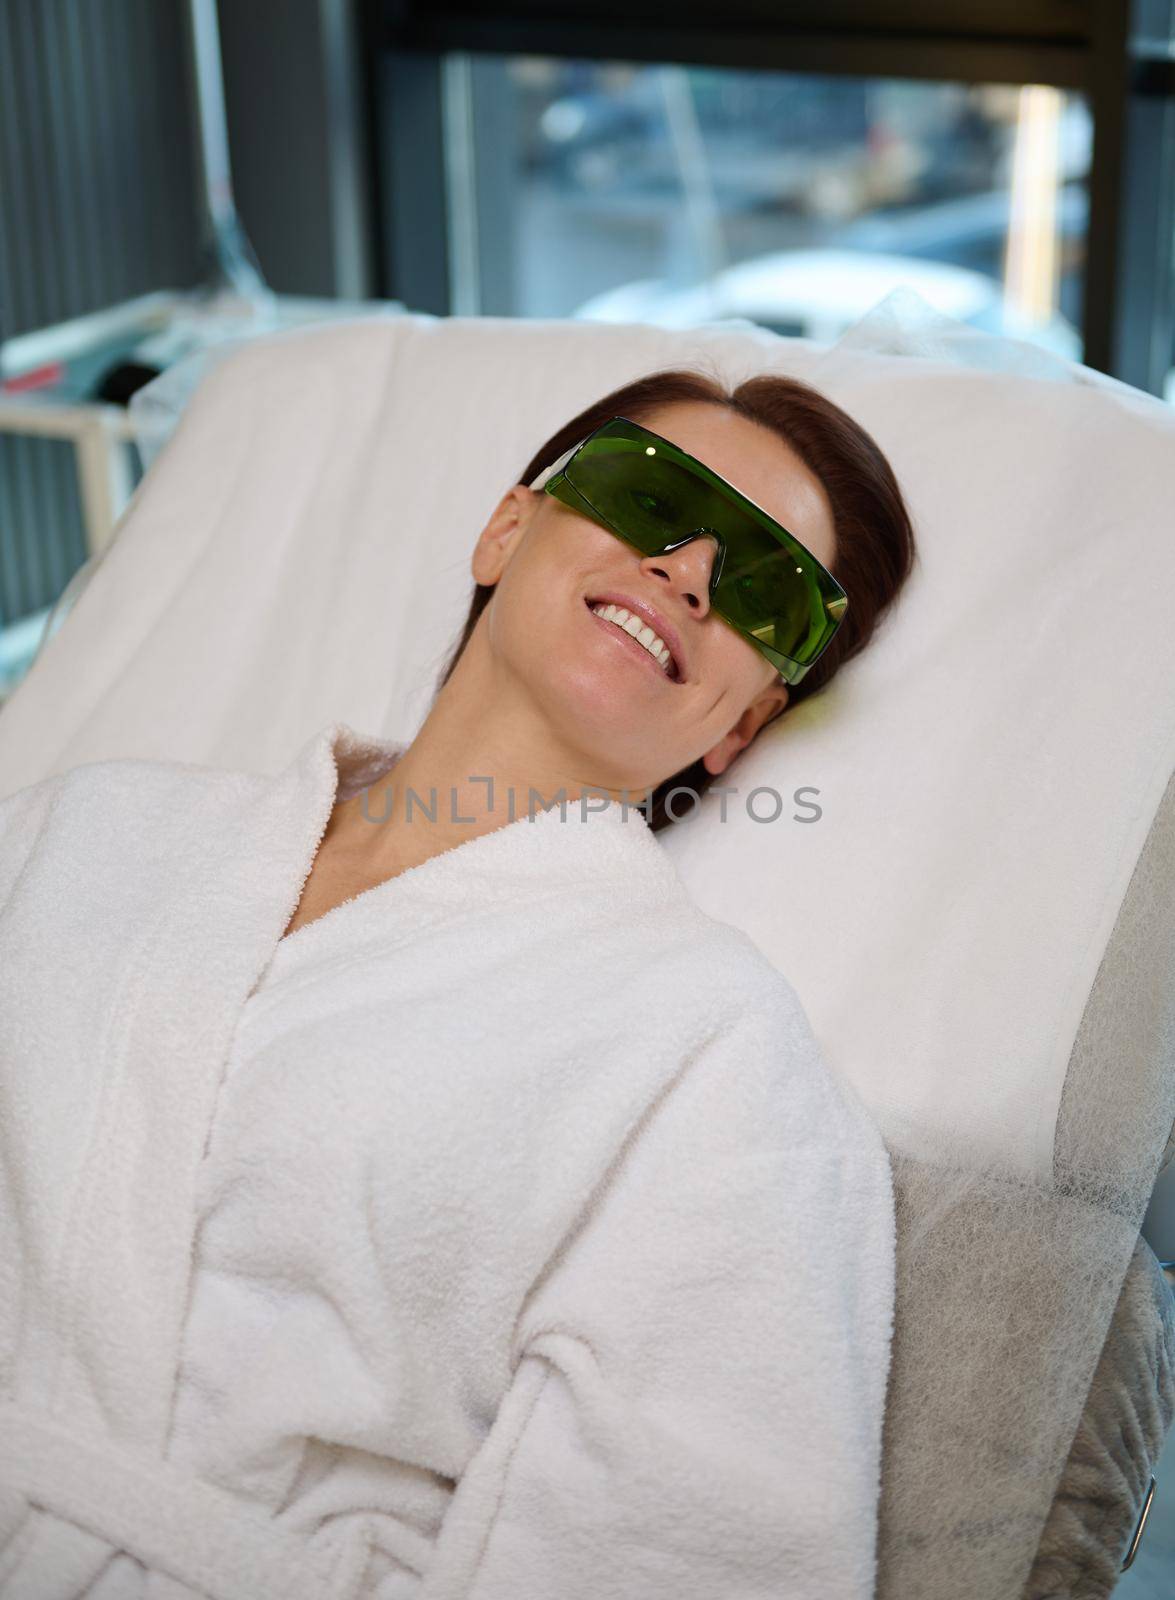 Attractive confident European woman, female patient with protective UV eyeglasses, wearing a white terry bathrobe lying on a massage couch during wellness and body care procedures in modern spa clinic by artgf